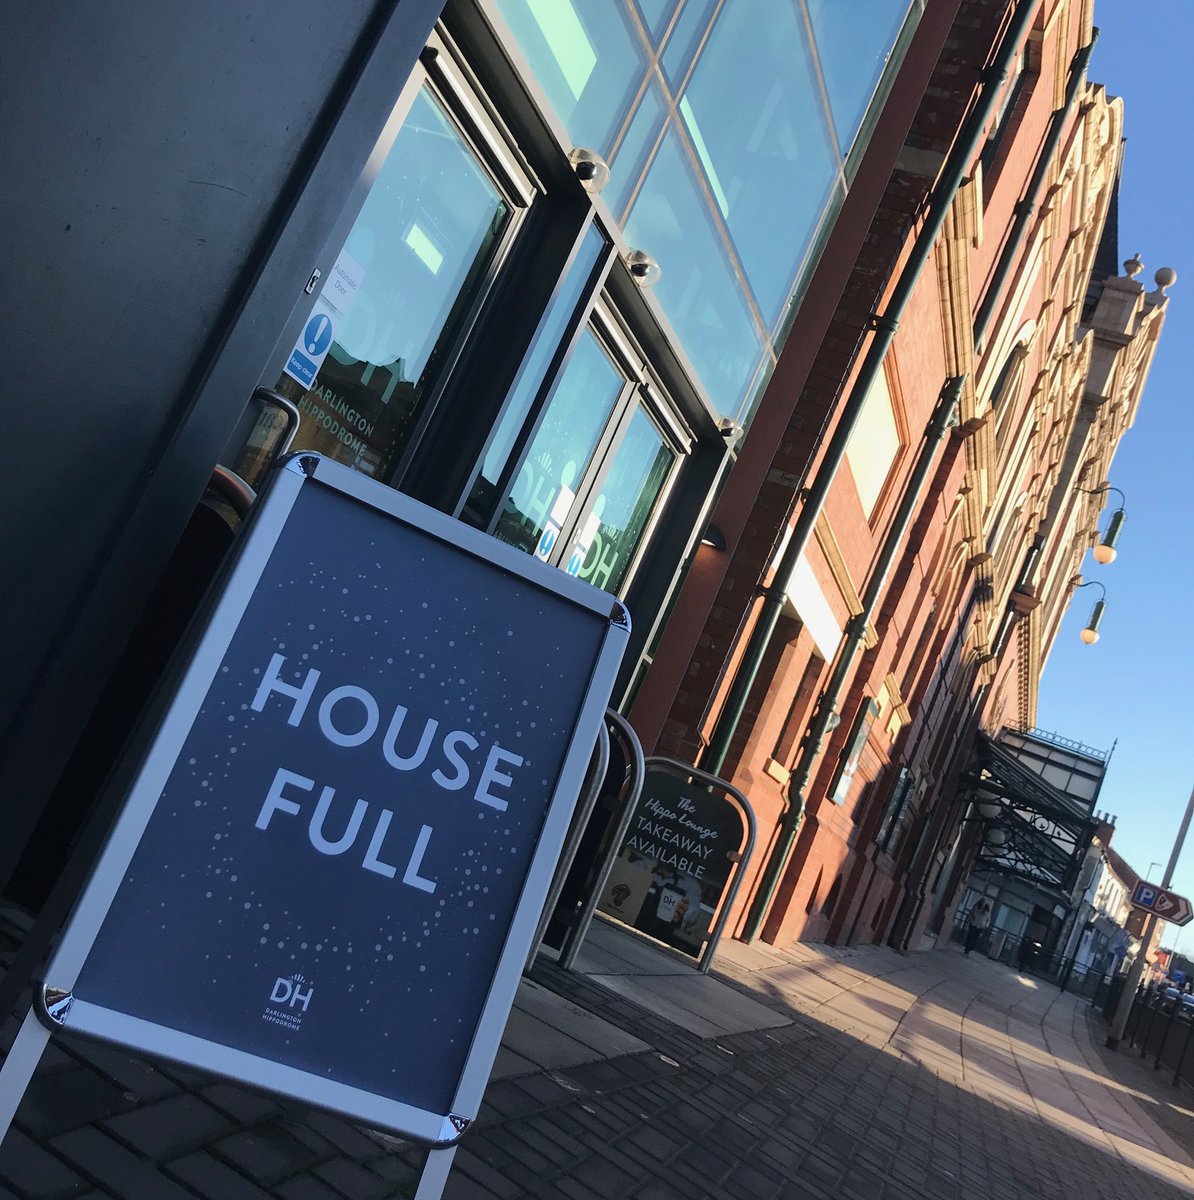 Darlington. Our Town. Your Town. Motown! Our sparkly new 'House Full' sign will be getting an airing at The Magic of Motown, tonight at 7:30pm. Call the Box office on 01325 405405 for any returns. @MagicOfMotown